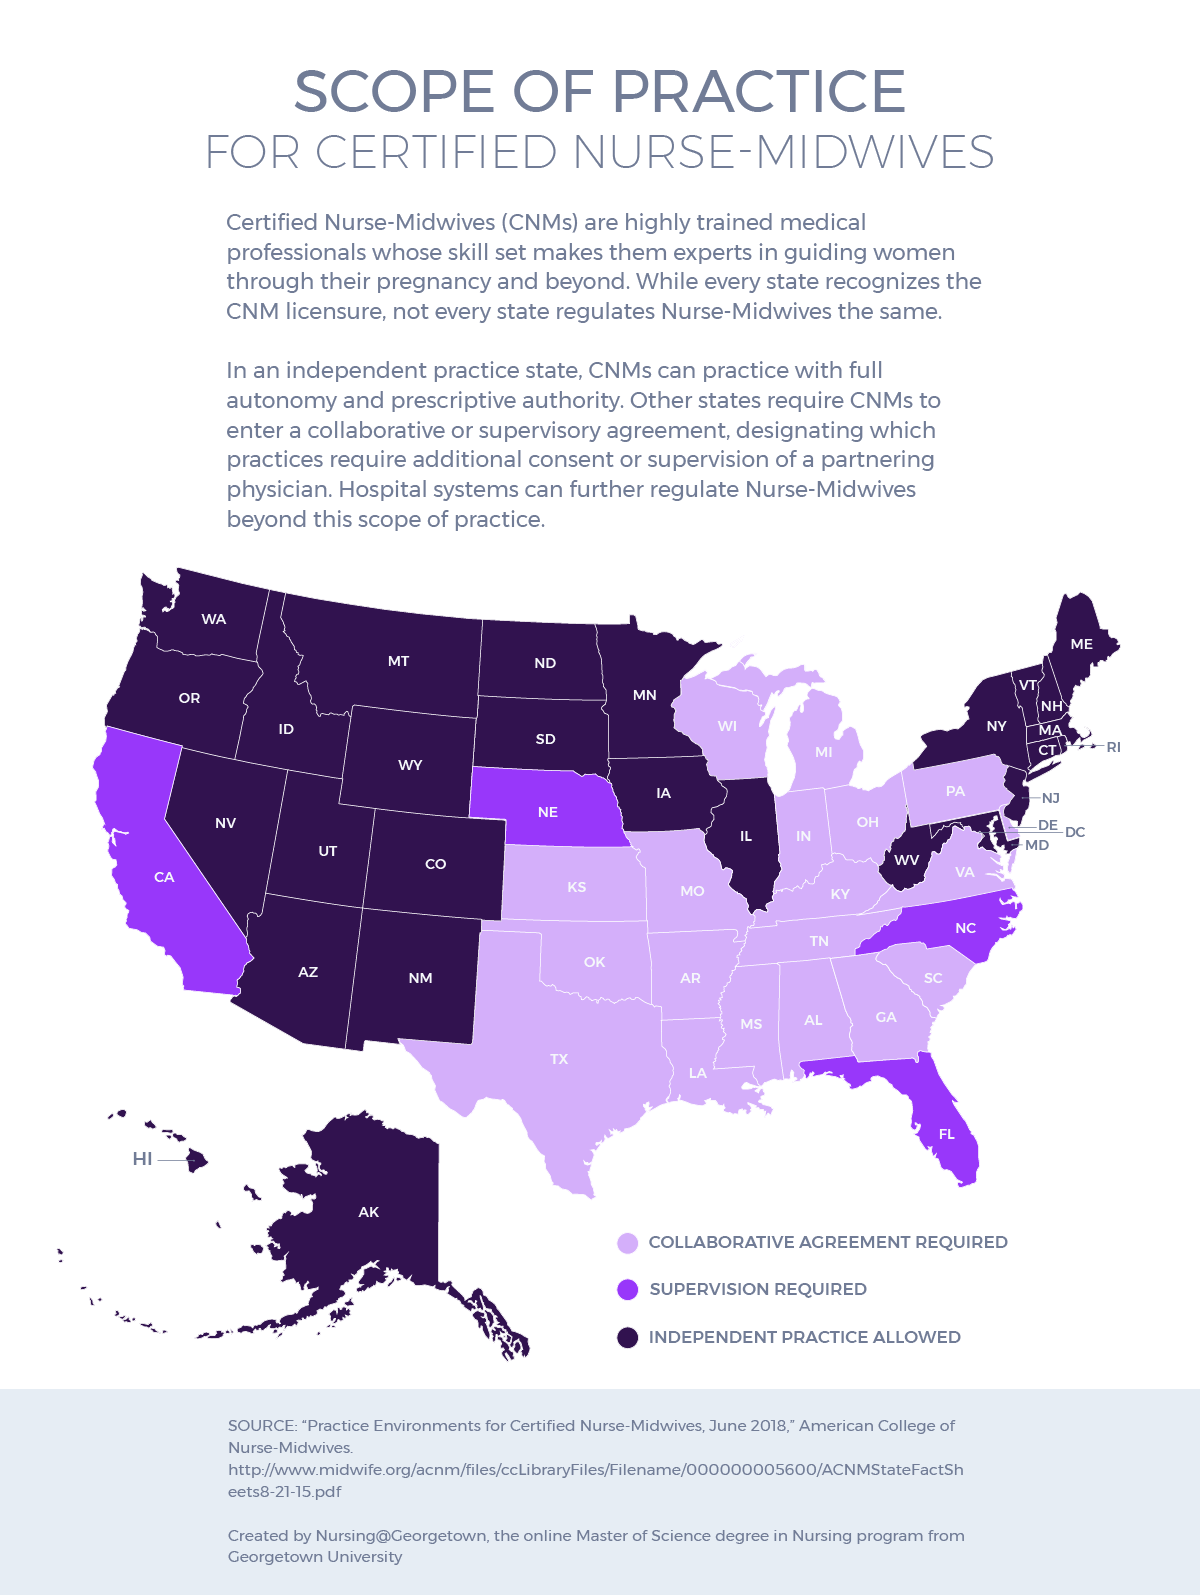 Saturation U.S. map illustrating the level of independent practice and supervision for certified Nurse-Midwives.